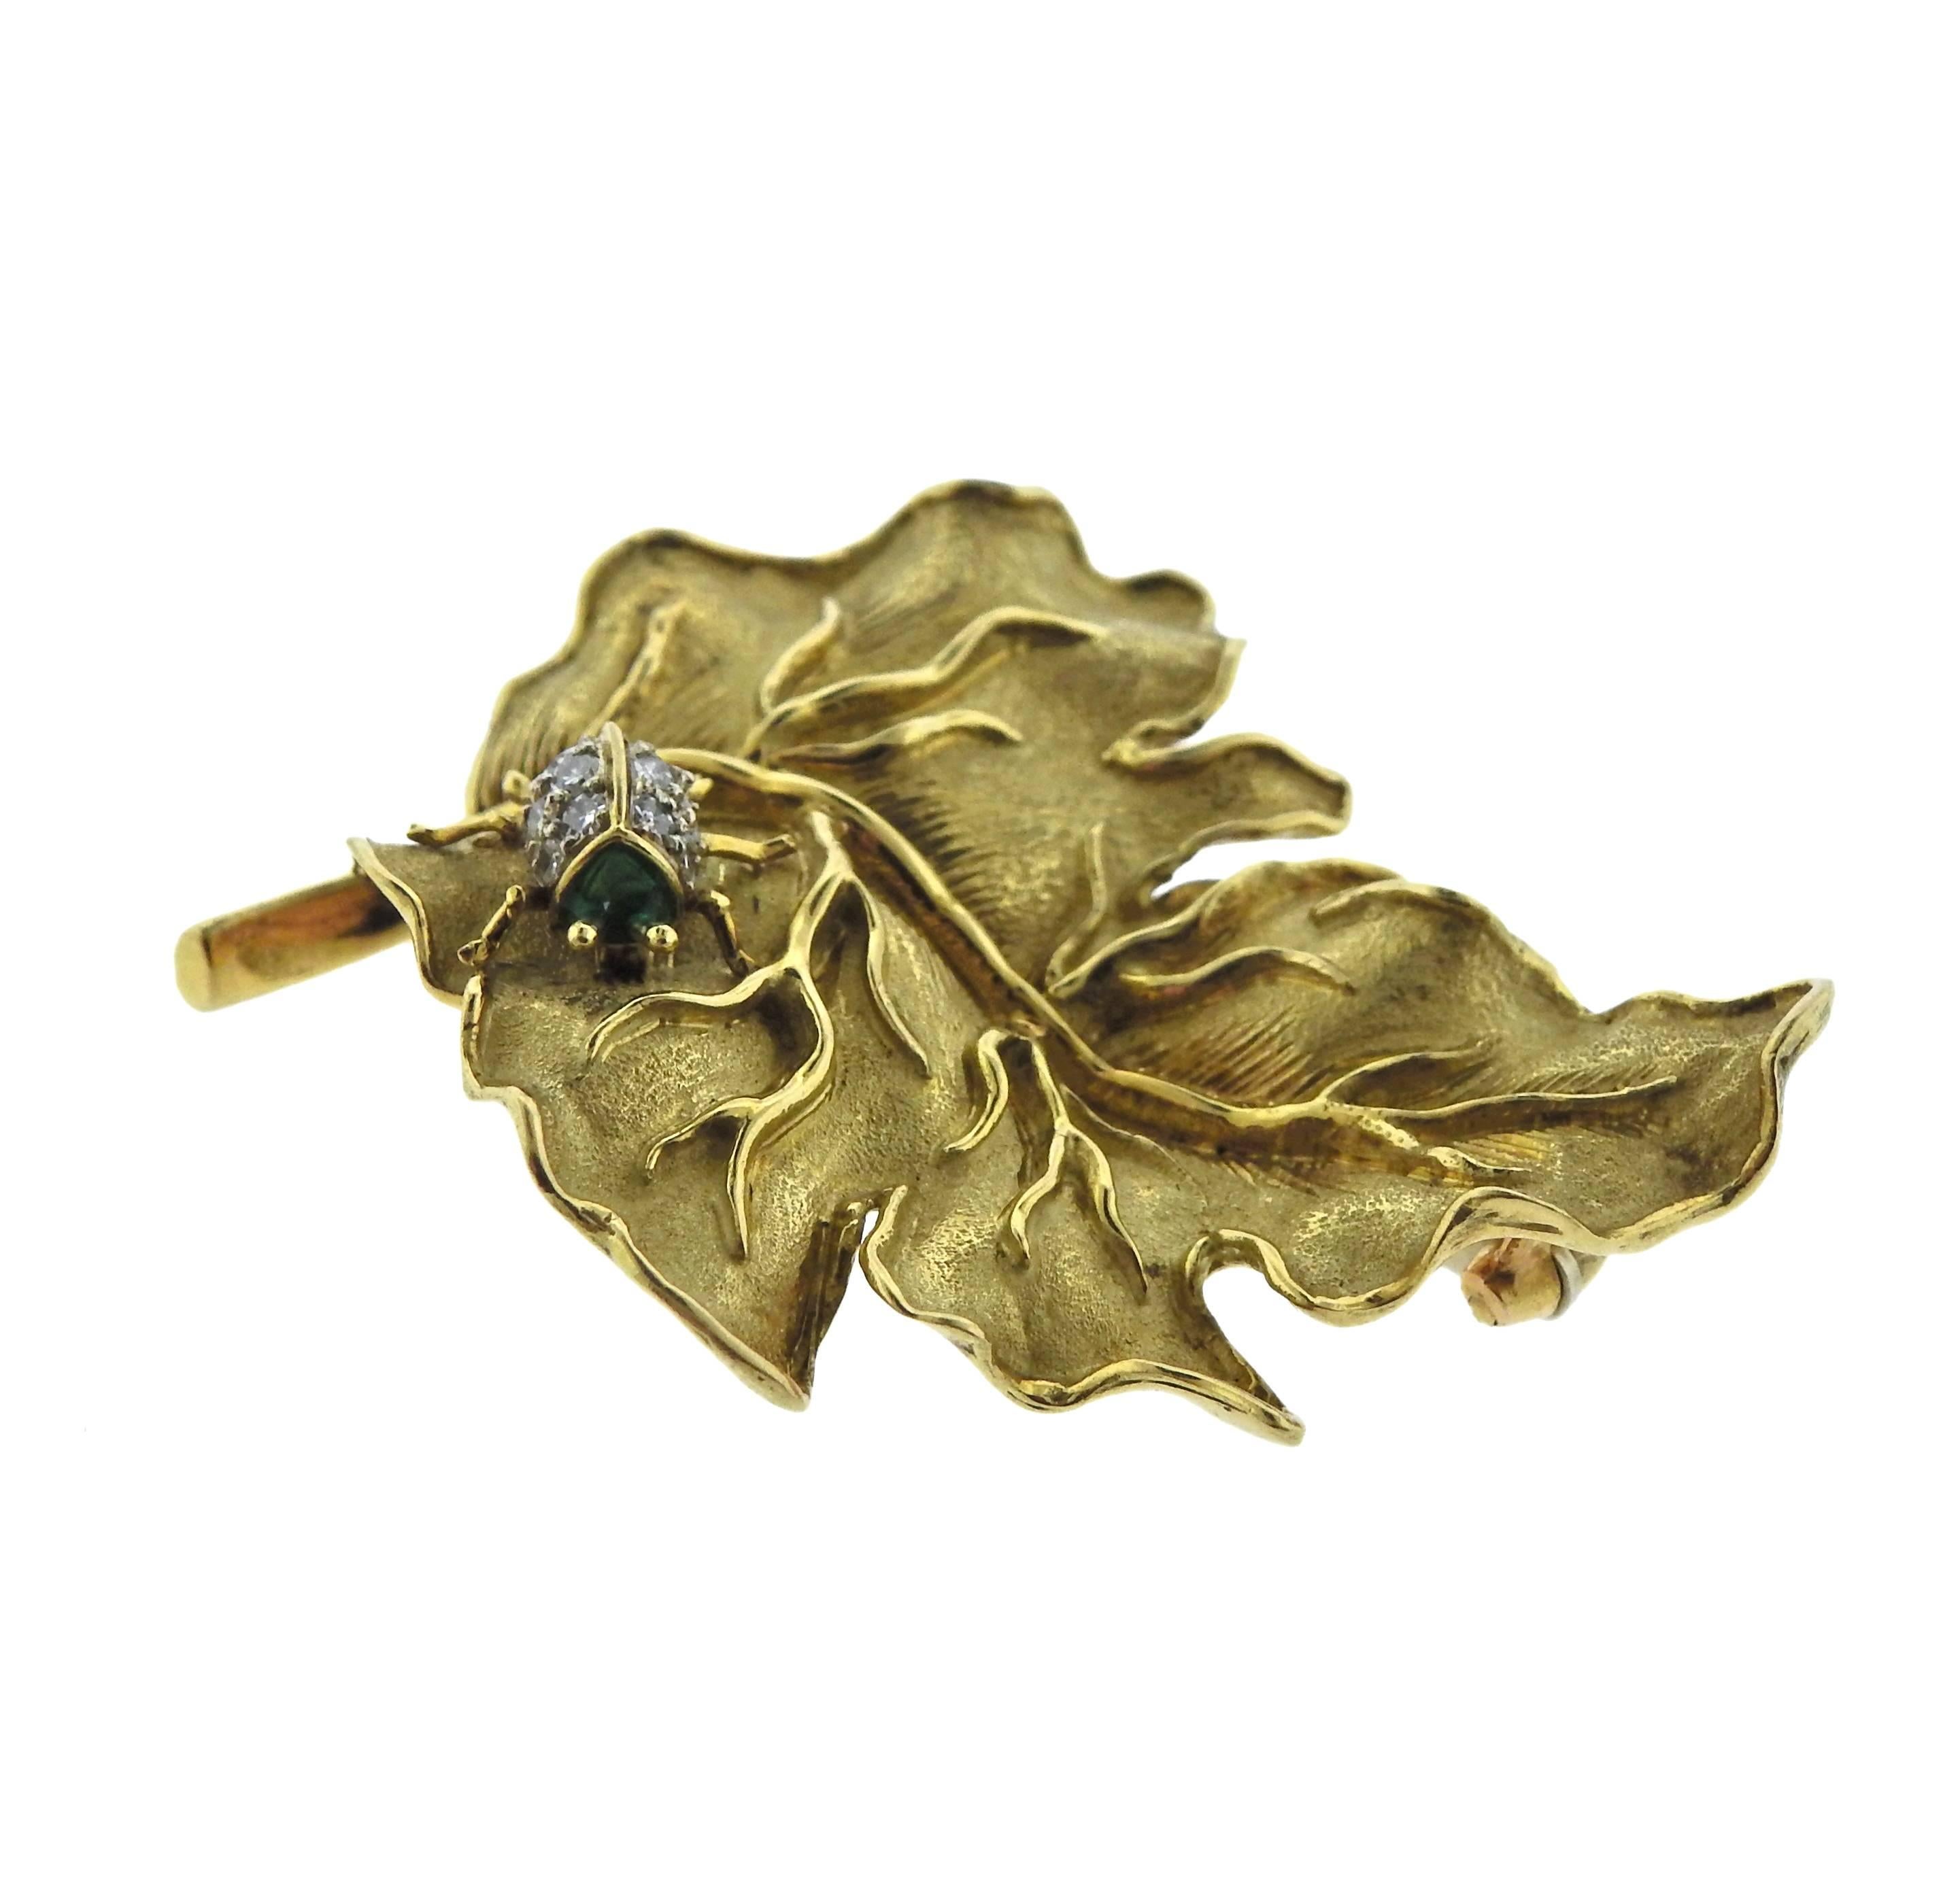 Whimsical 18k gold leaf brooch depicting a lady bug, crafted by Tiffany & Co. Features approximately 0.10ctw of G/VS diamonds and emerald. Brooch is 49mm x 39mm, weight is 17.1 grams. Marked k18, Italy, Tiffany & Co. 